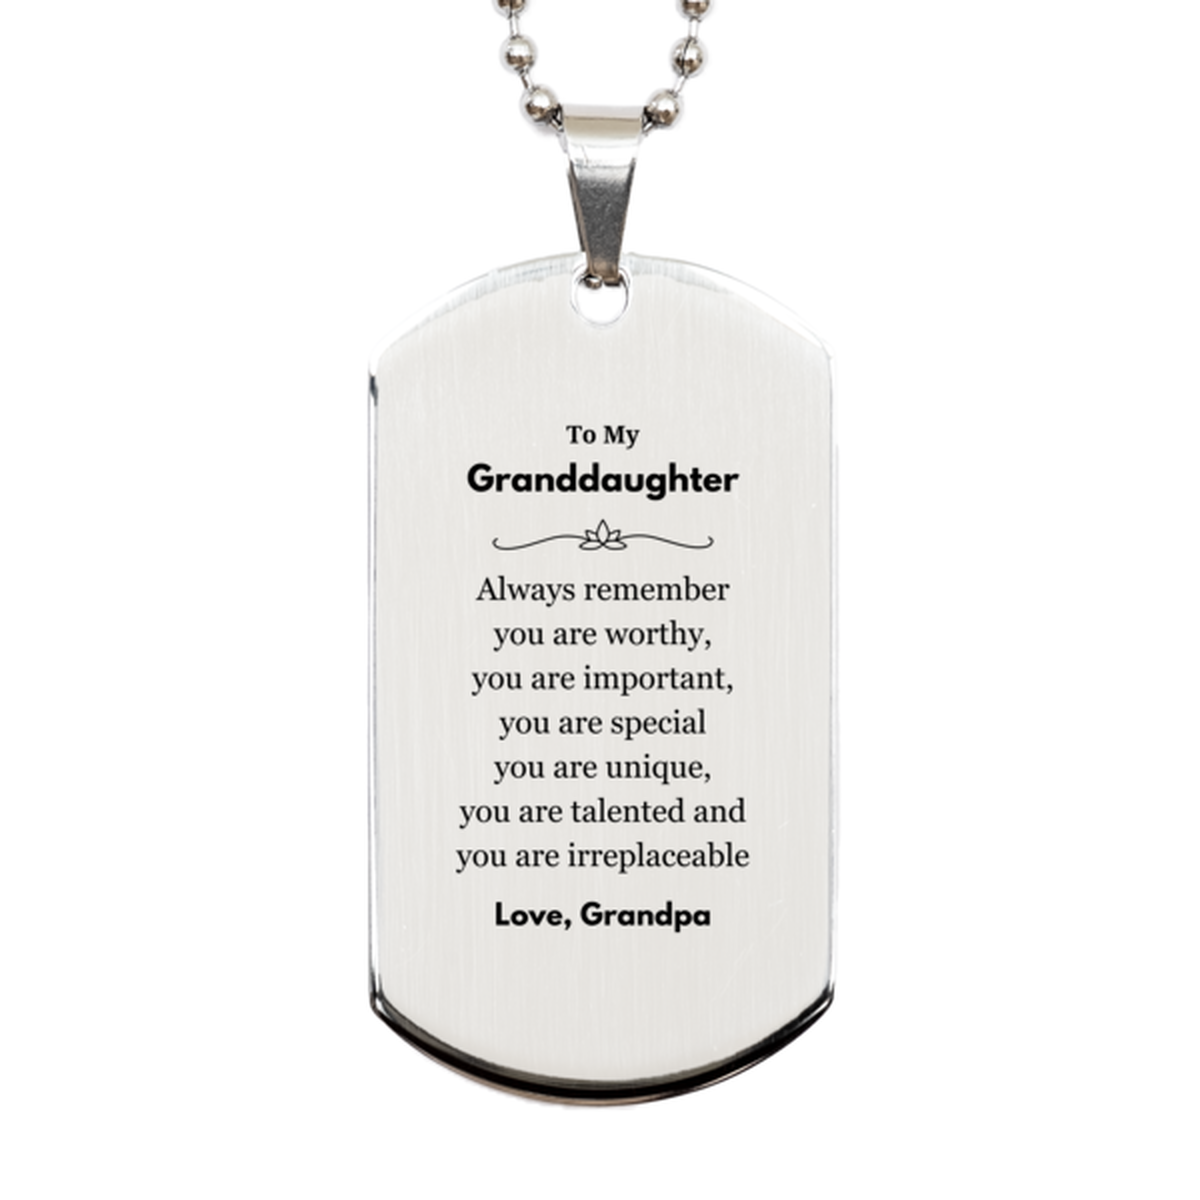 Granddaughter Birthday Gifts from Grandpa, Inspirational Silver Dog Tag for Granddaughter Christmas Graduation Gifts for Granddaughter Always remember you are worthy, you are important. Love, Grandpa